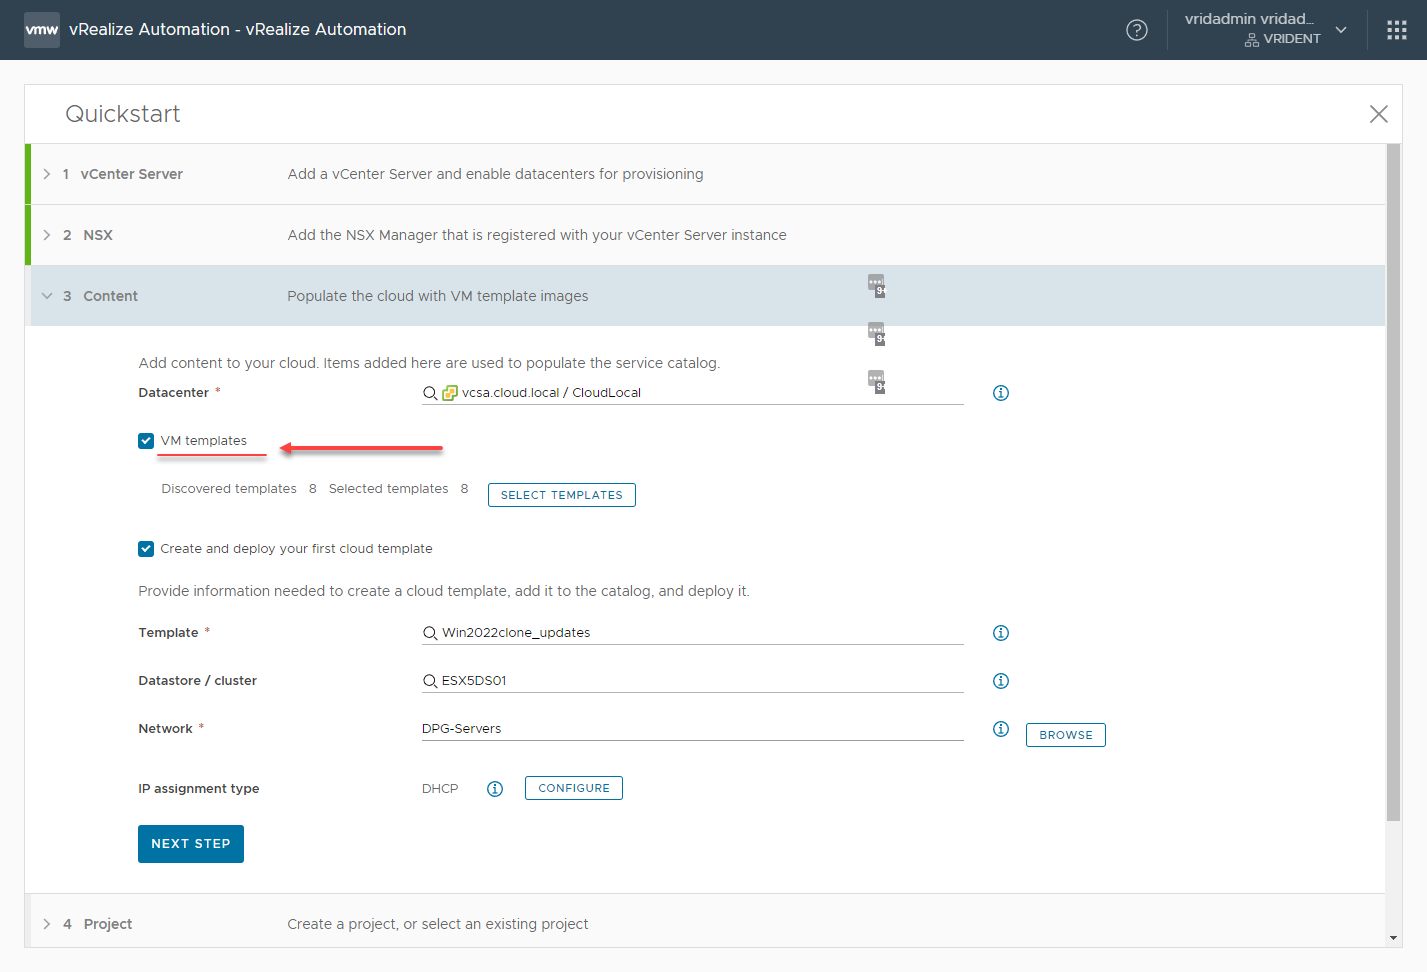 Adding VM templates and specifying the settings for the first cloud template